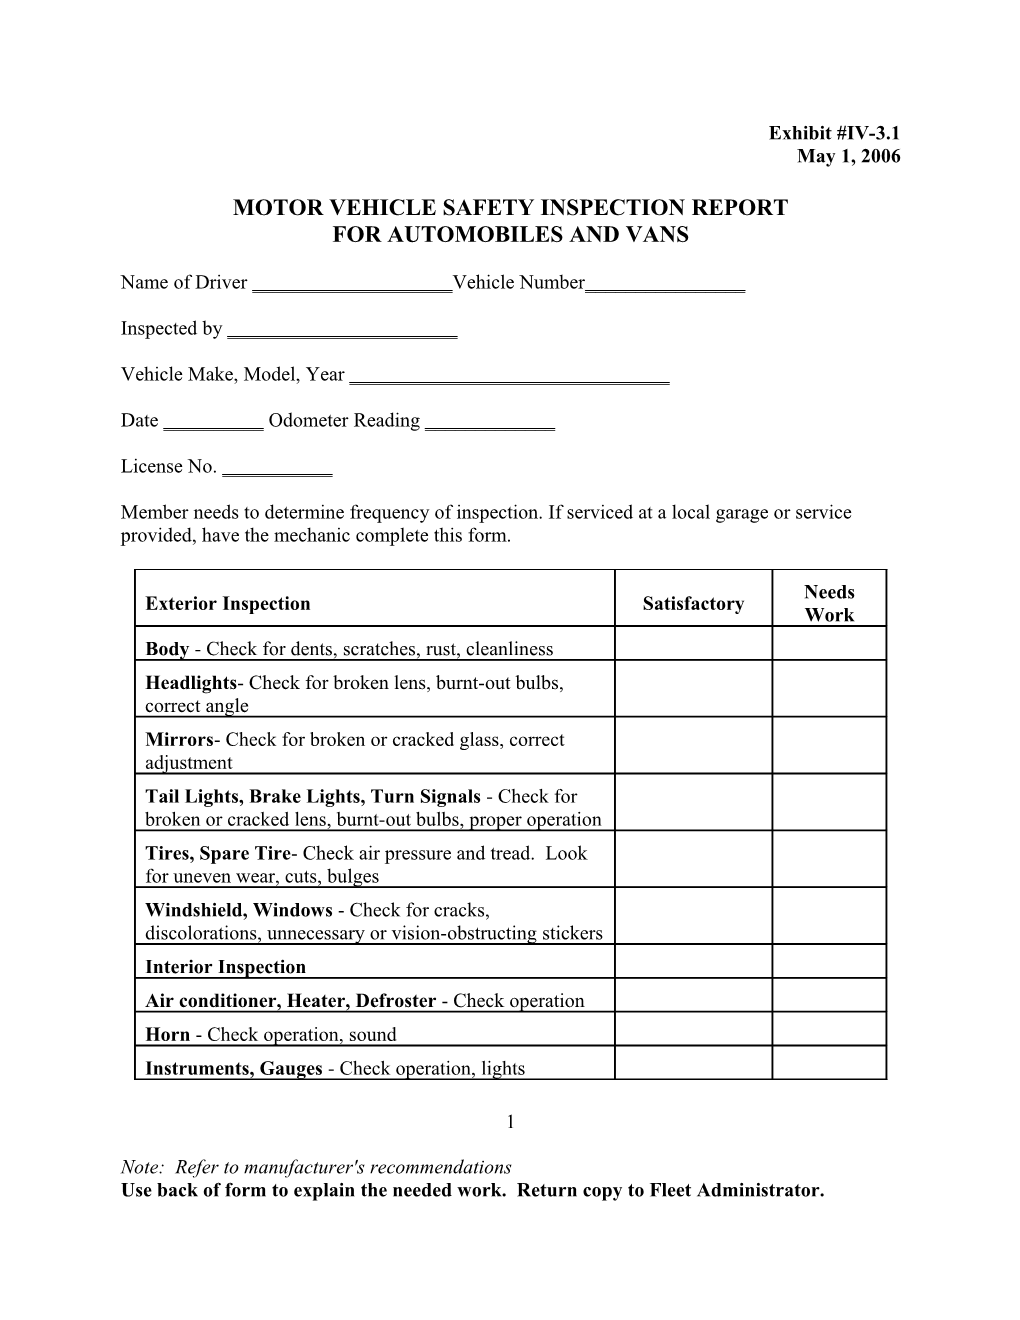 Motor Vehicle Safety Inspection Report